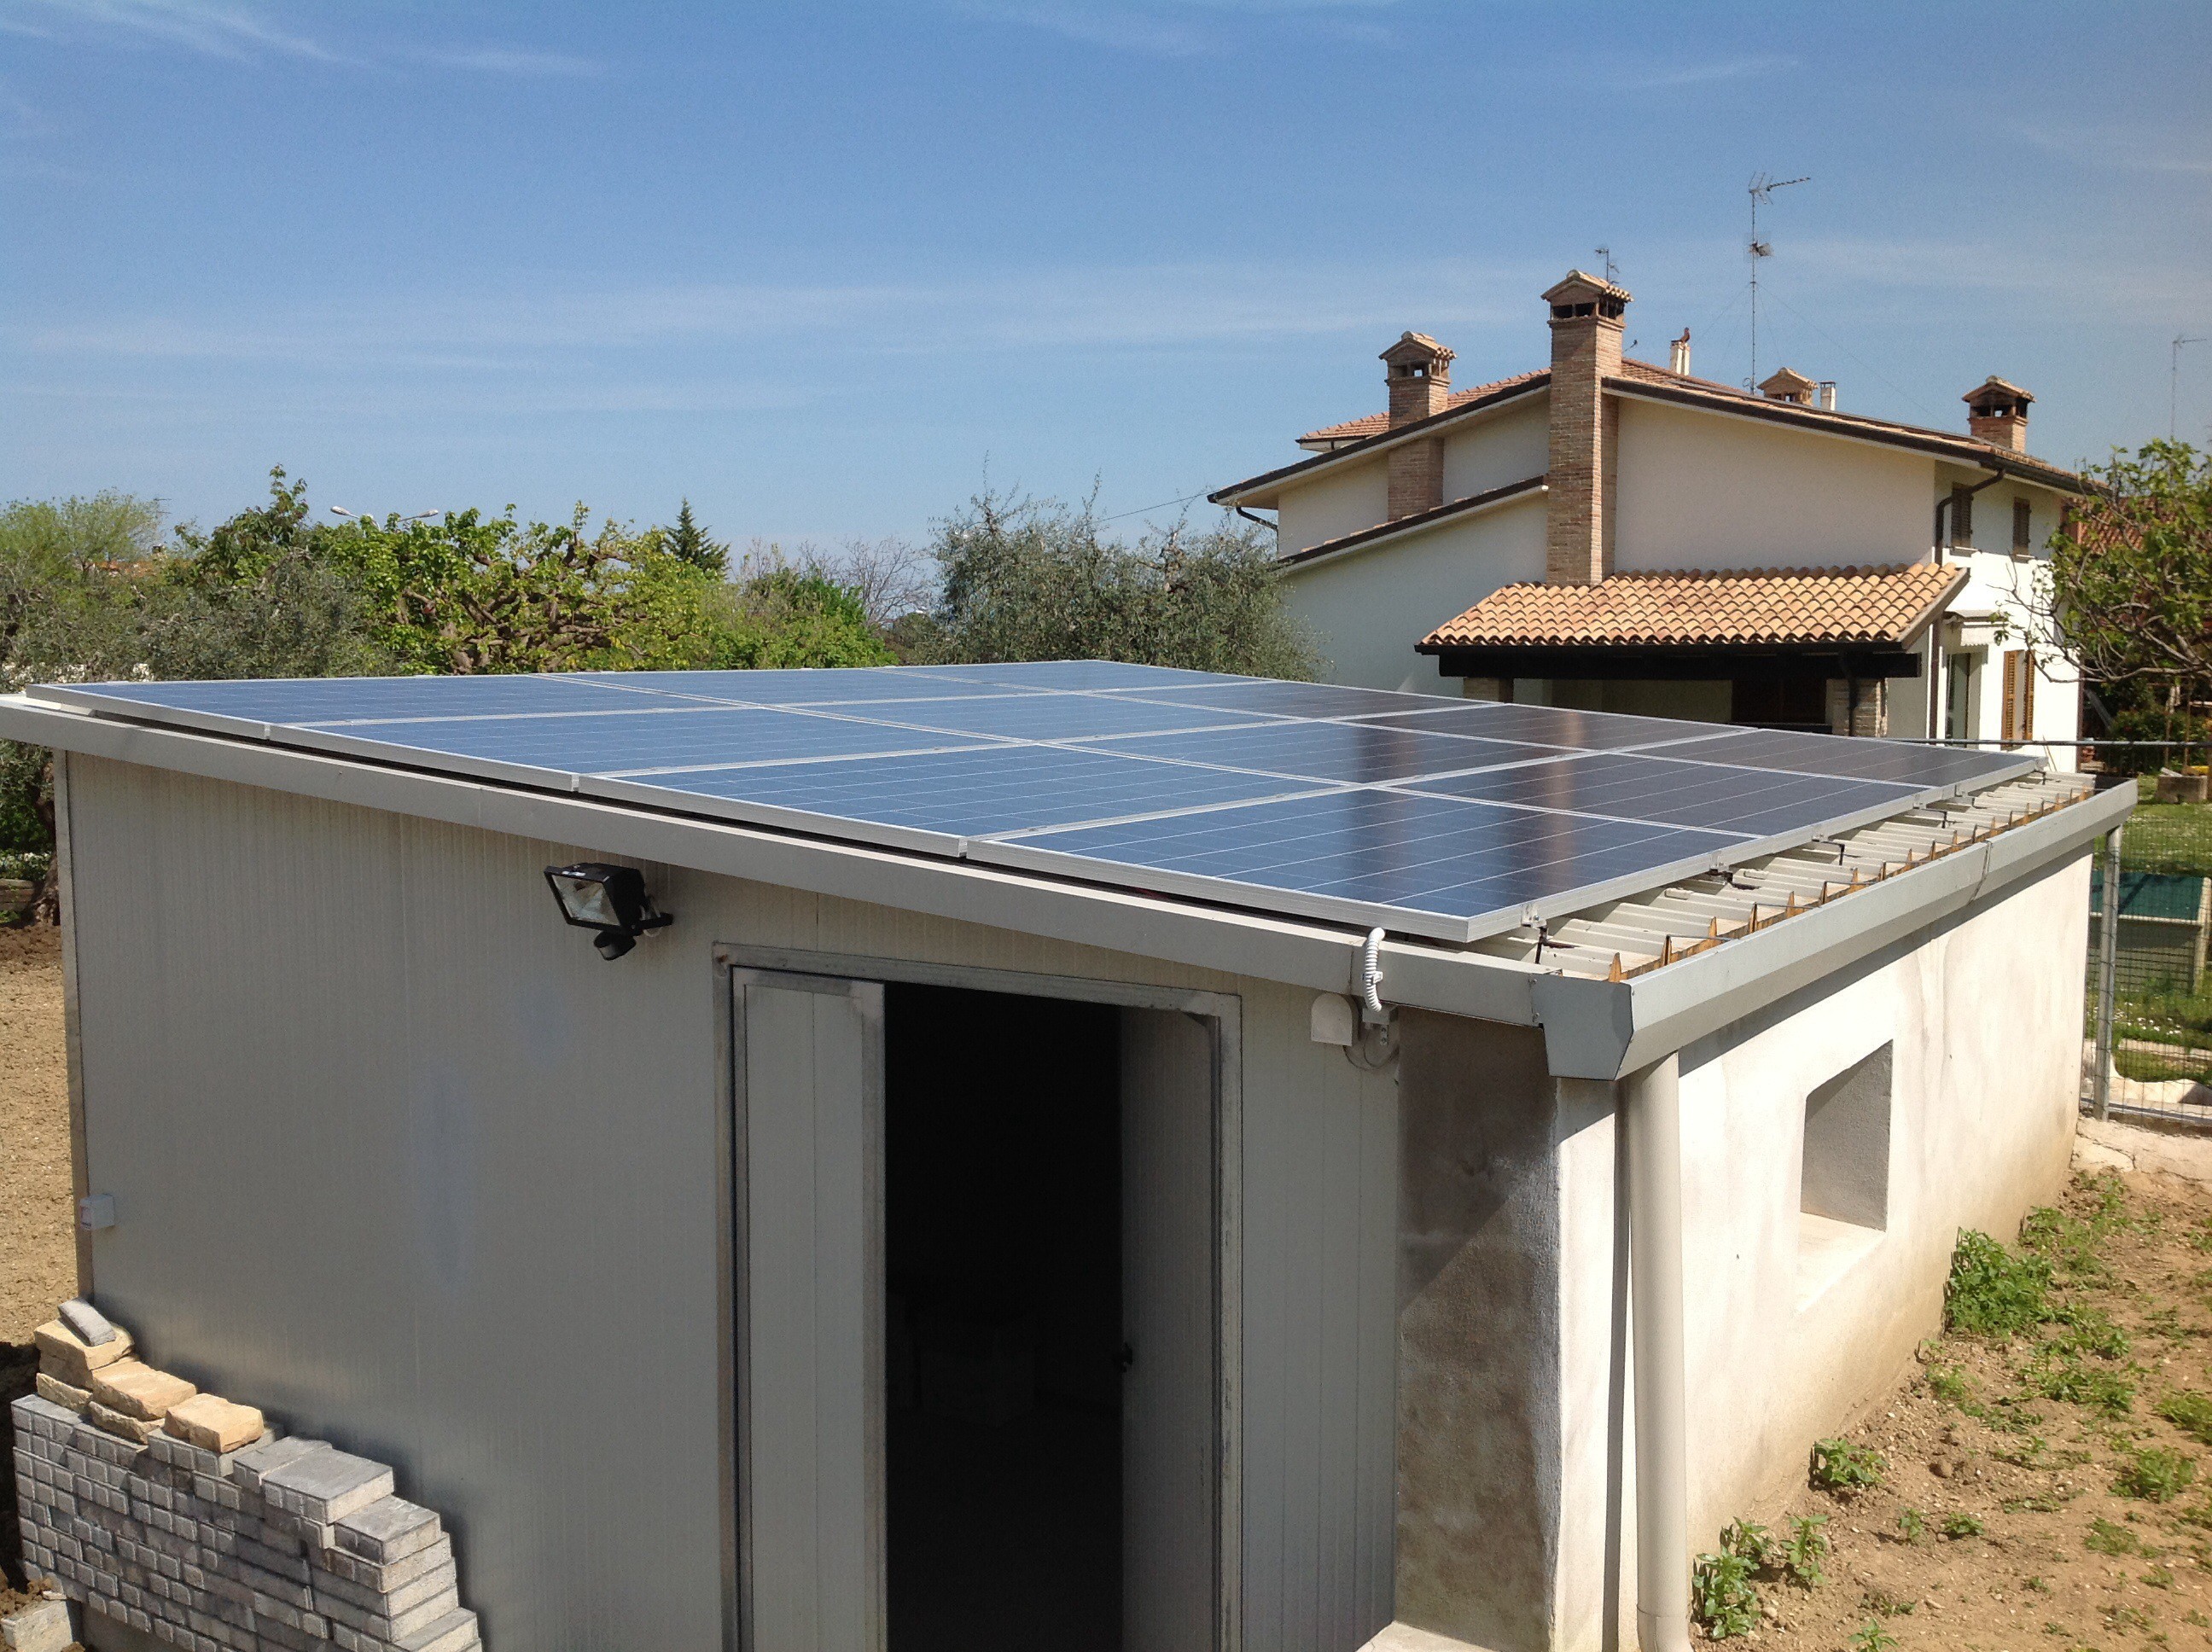 CSolutions S.r.l - Fano 3500 kWh